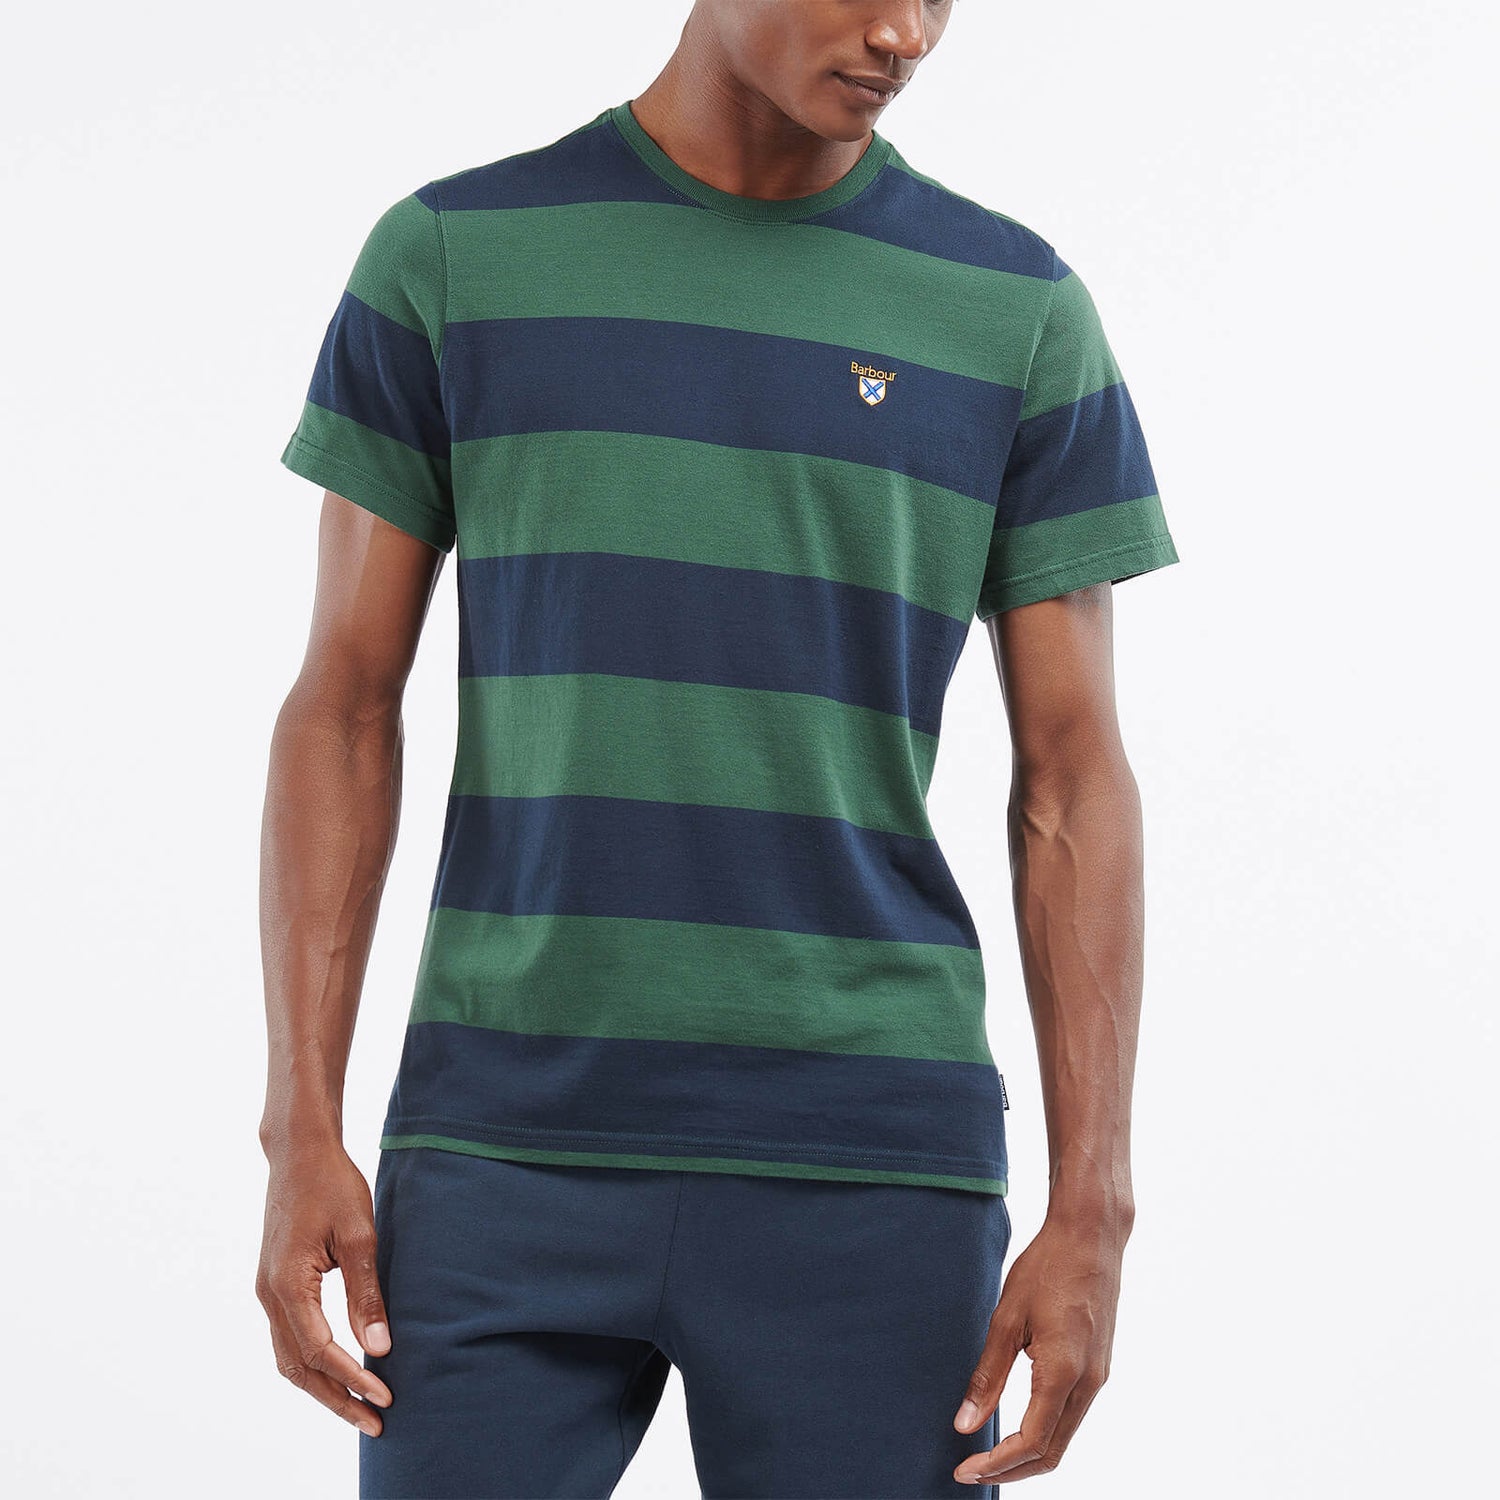 Barbour Heritage Men's Cornell Stripe T-Shirt - Sycamore - S